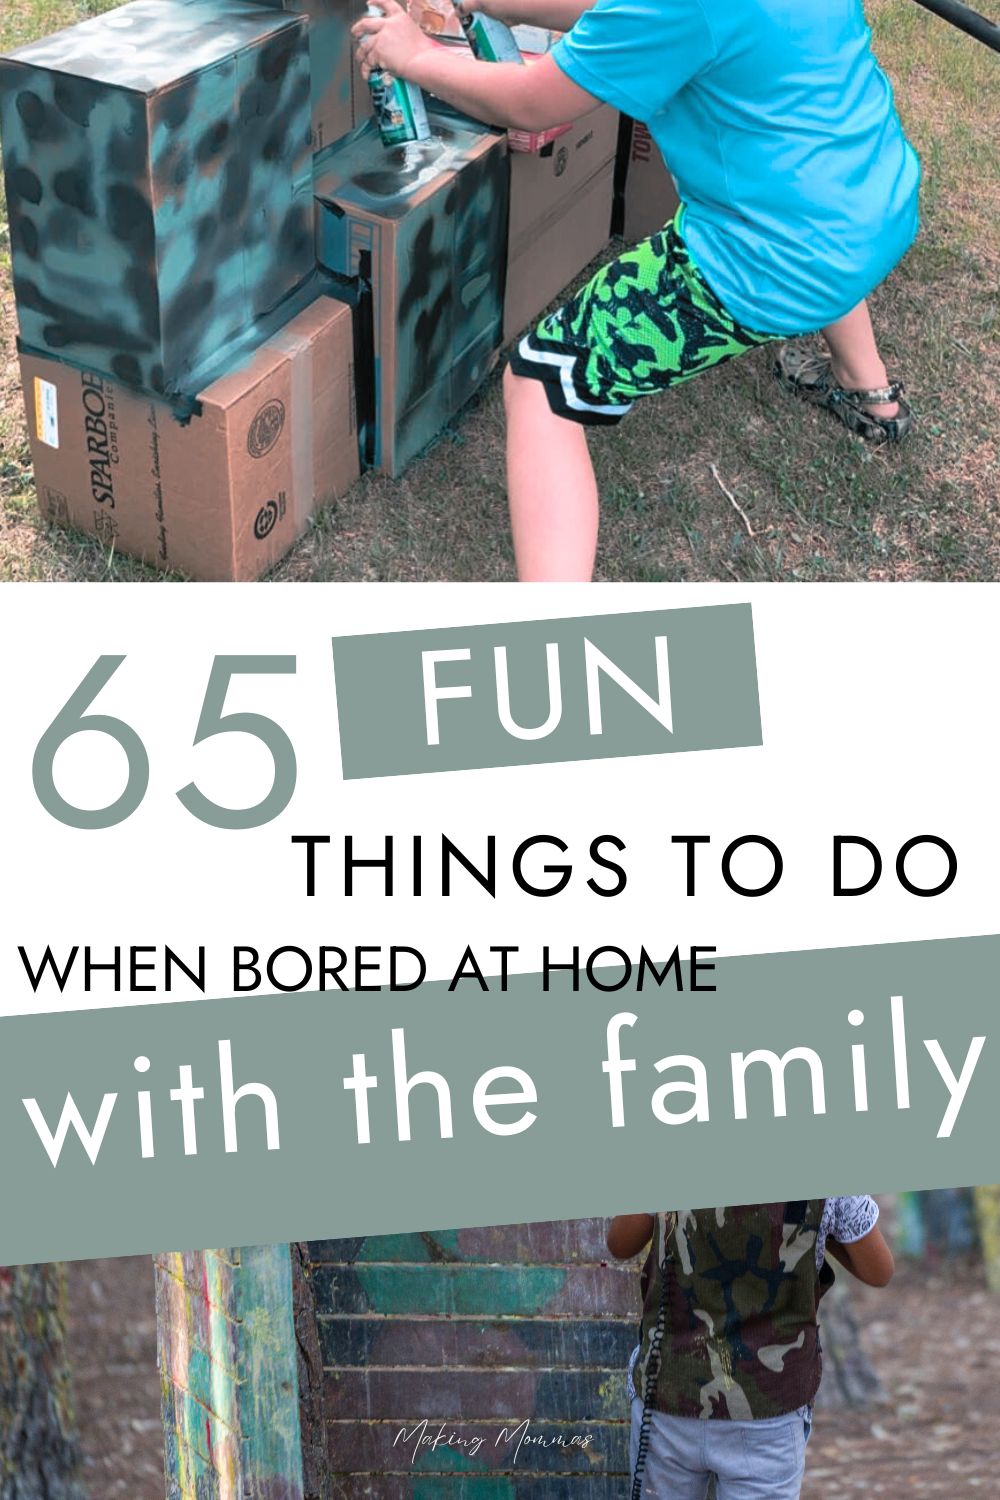 pin image of 65 fun things to do when bored at home with the family, with a boy building a camo fort out of boxes and another boy in a camo vest hiding behind a fort